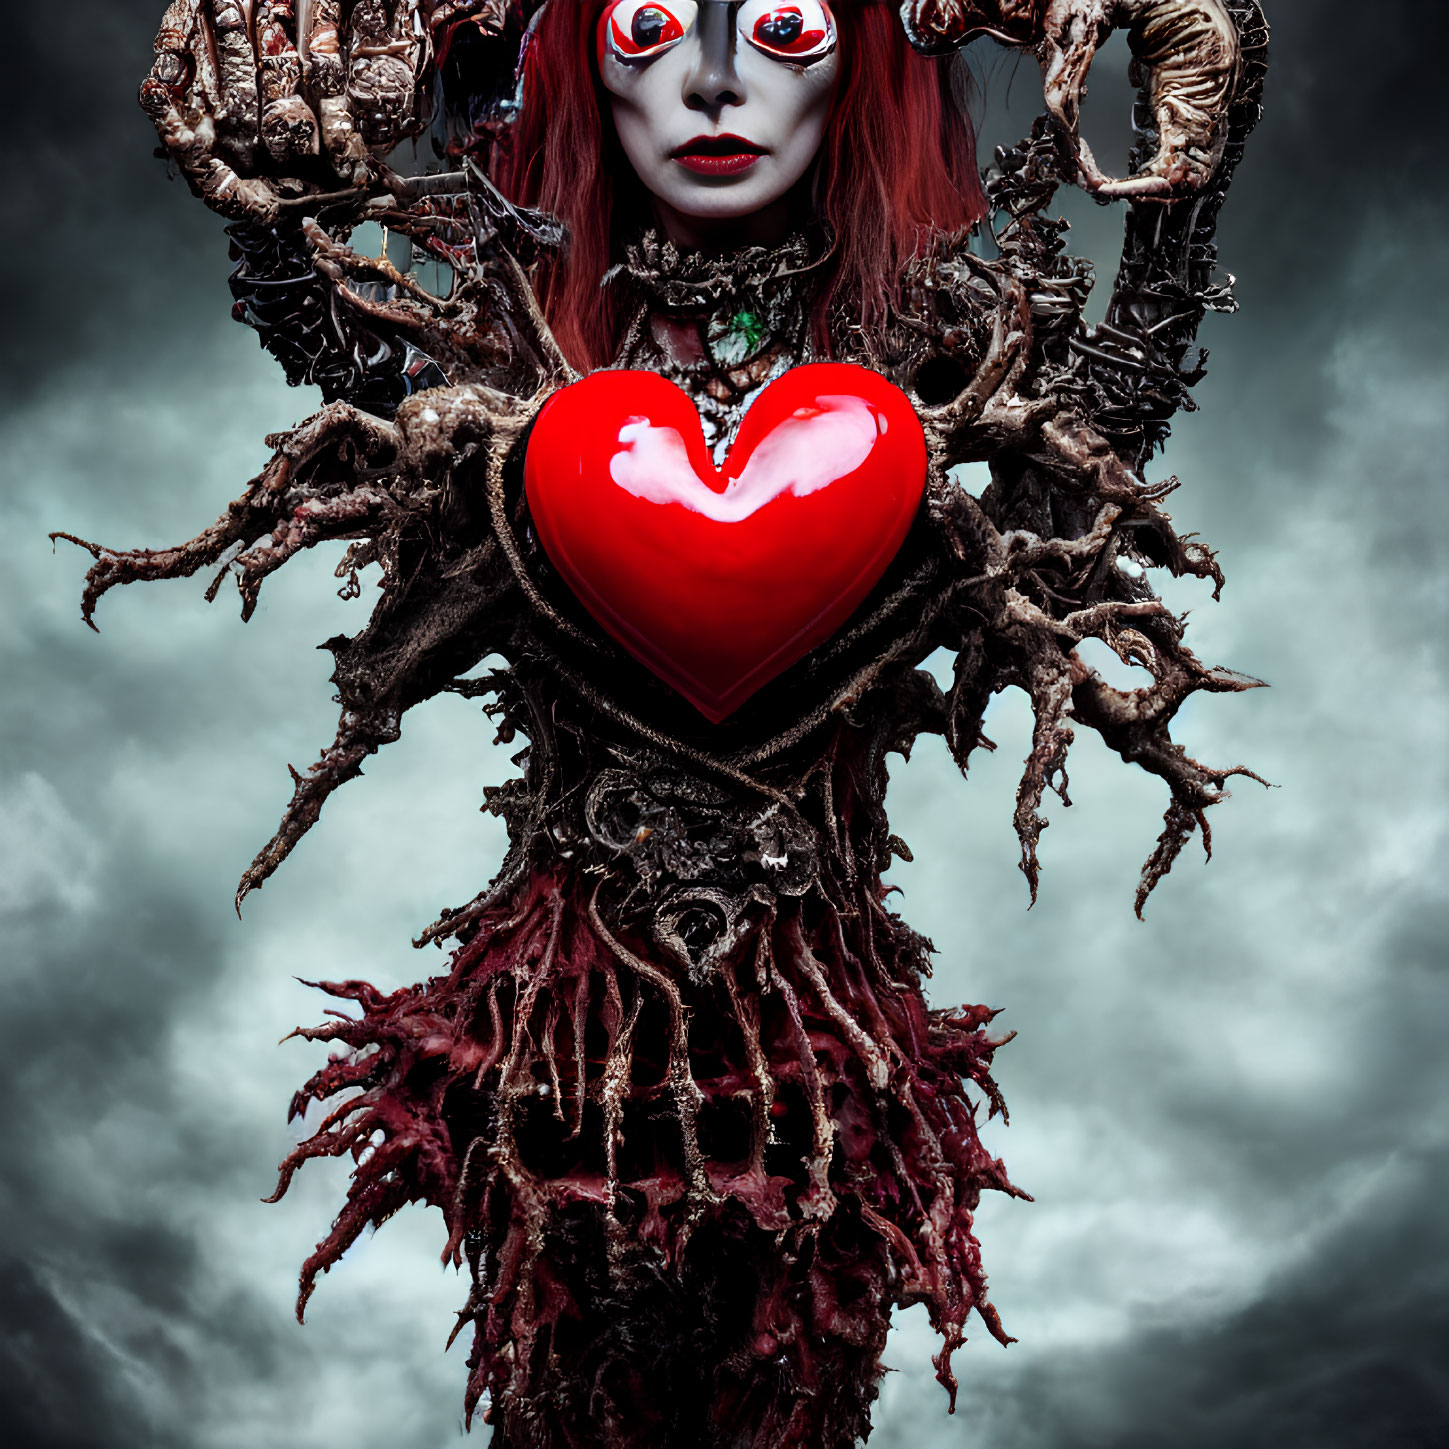 Gothic figure with red eyes and heart in eerie setting